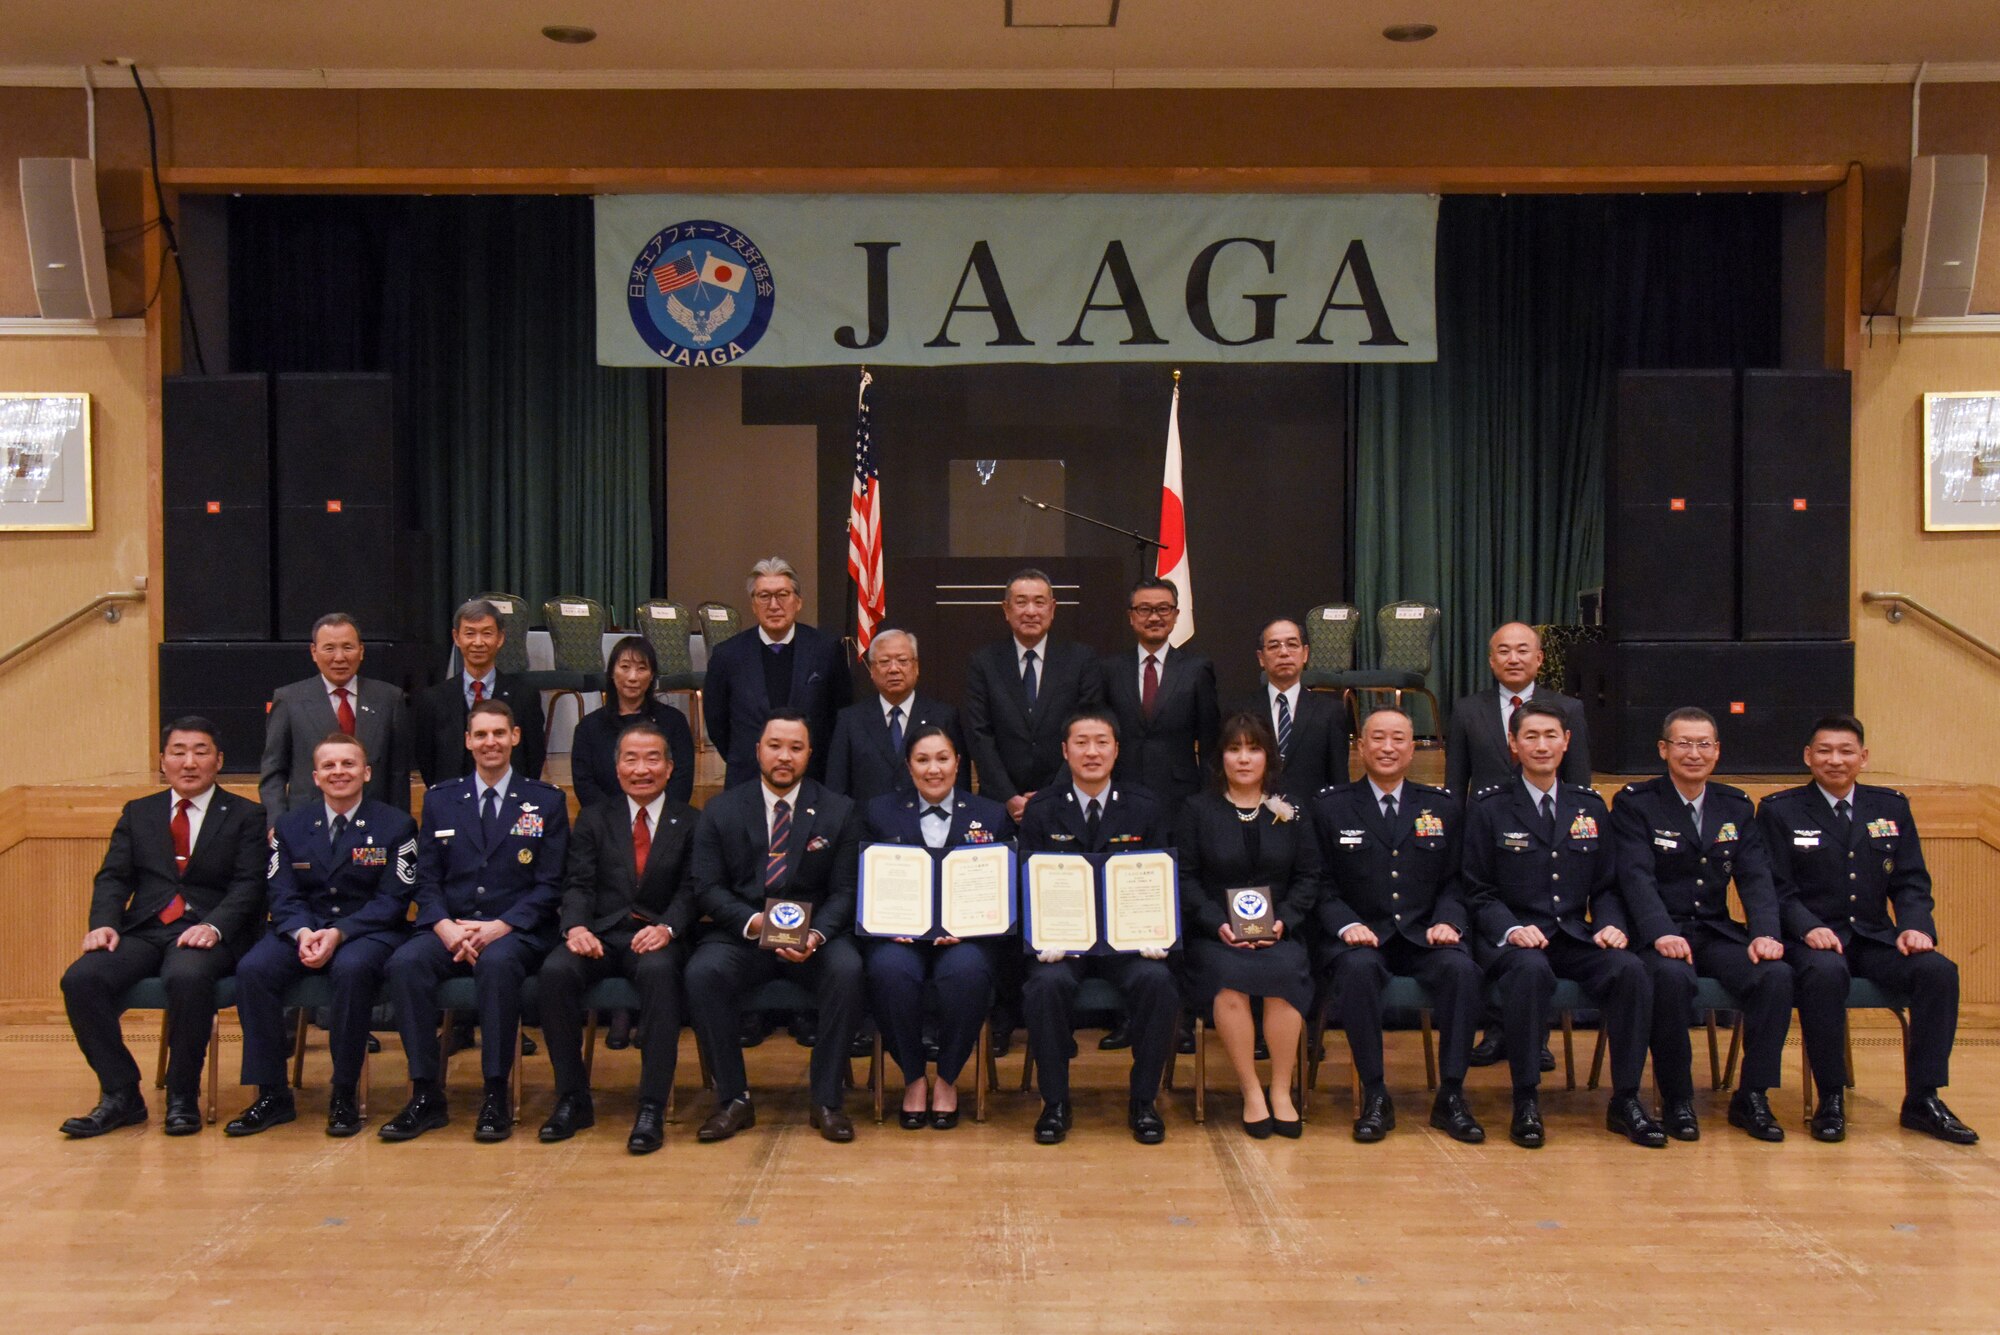 Military members and civilians pose for a group photo in front of a stage with a banner with "JAAGA" hanging above their heads.